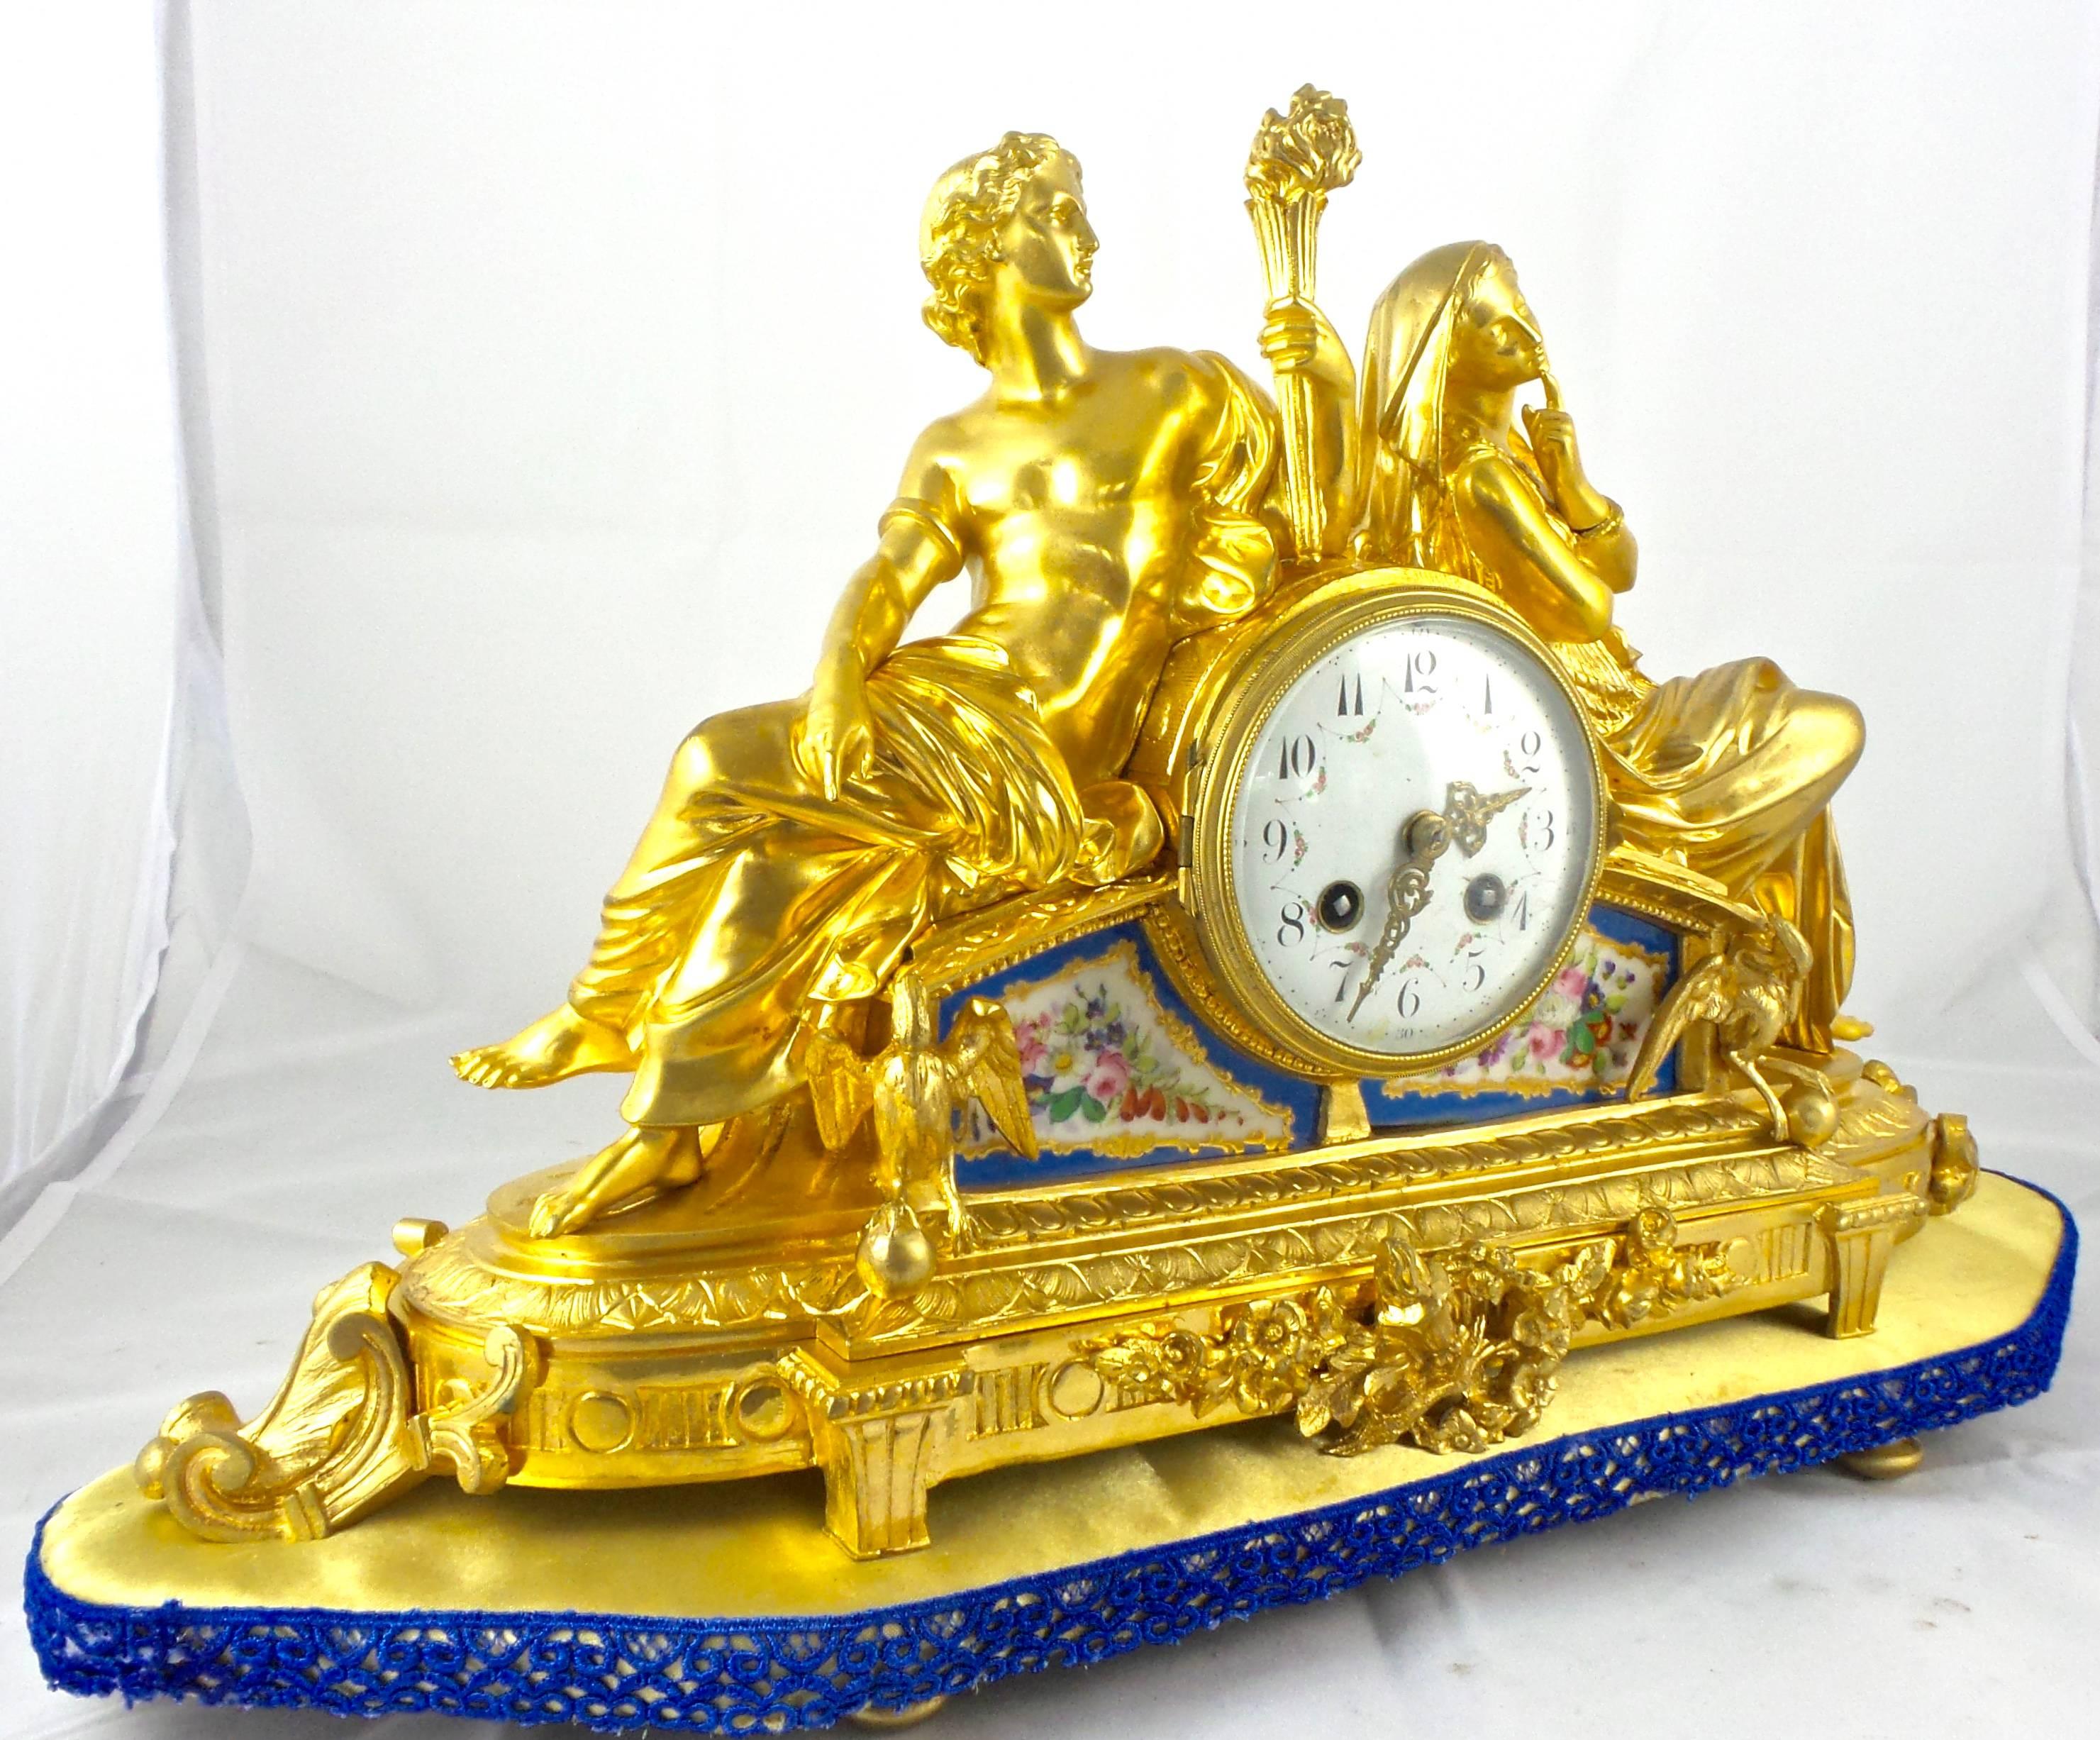 19th century French classical mantel clock of very high quality
Gilt ormolu bronze with hand-painted Sevres porcelain
Romantic classical figure with fire torch and figurine on top and other fine adornments and designs
Coming on a base
Convex